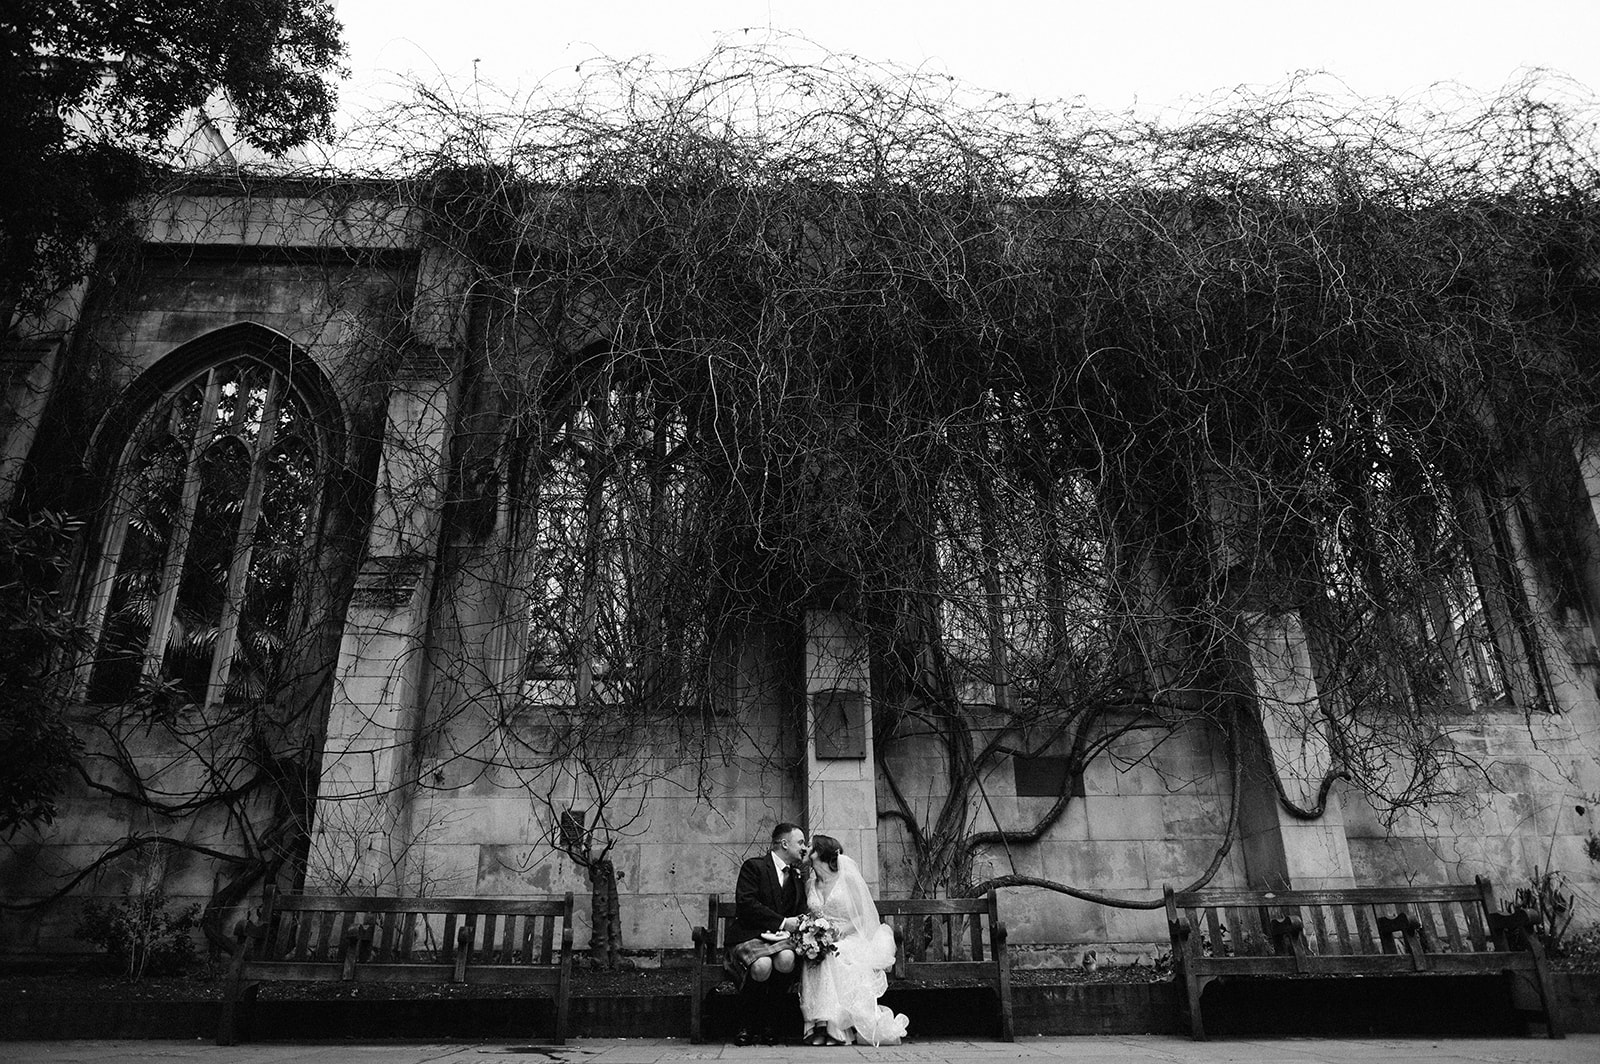 The bride and groom at St Dunstan East Church ruins in London on their wedding day